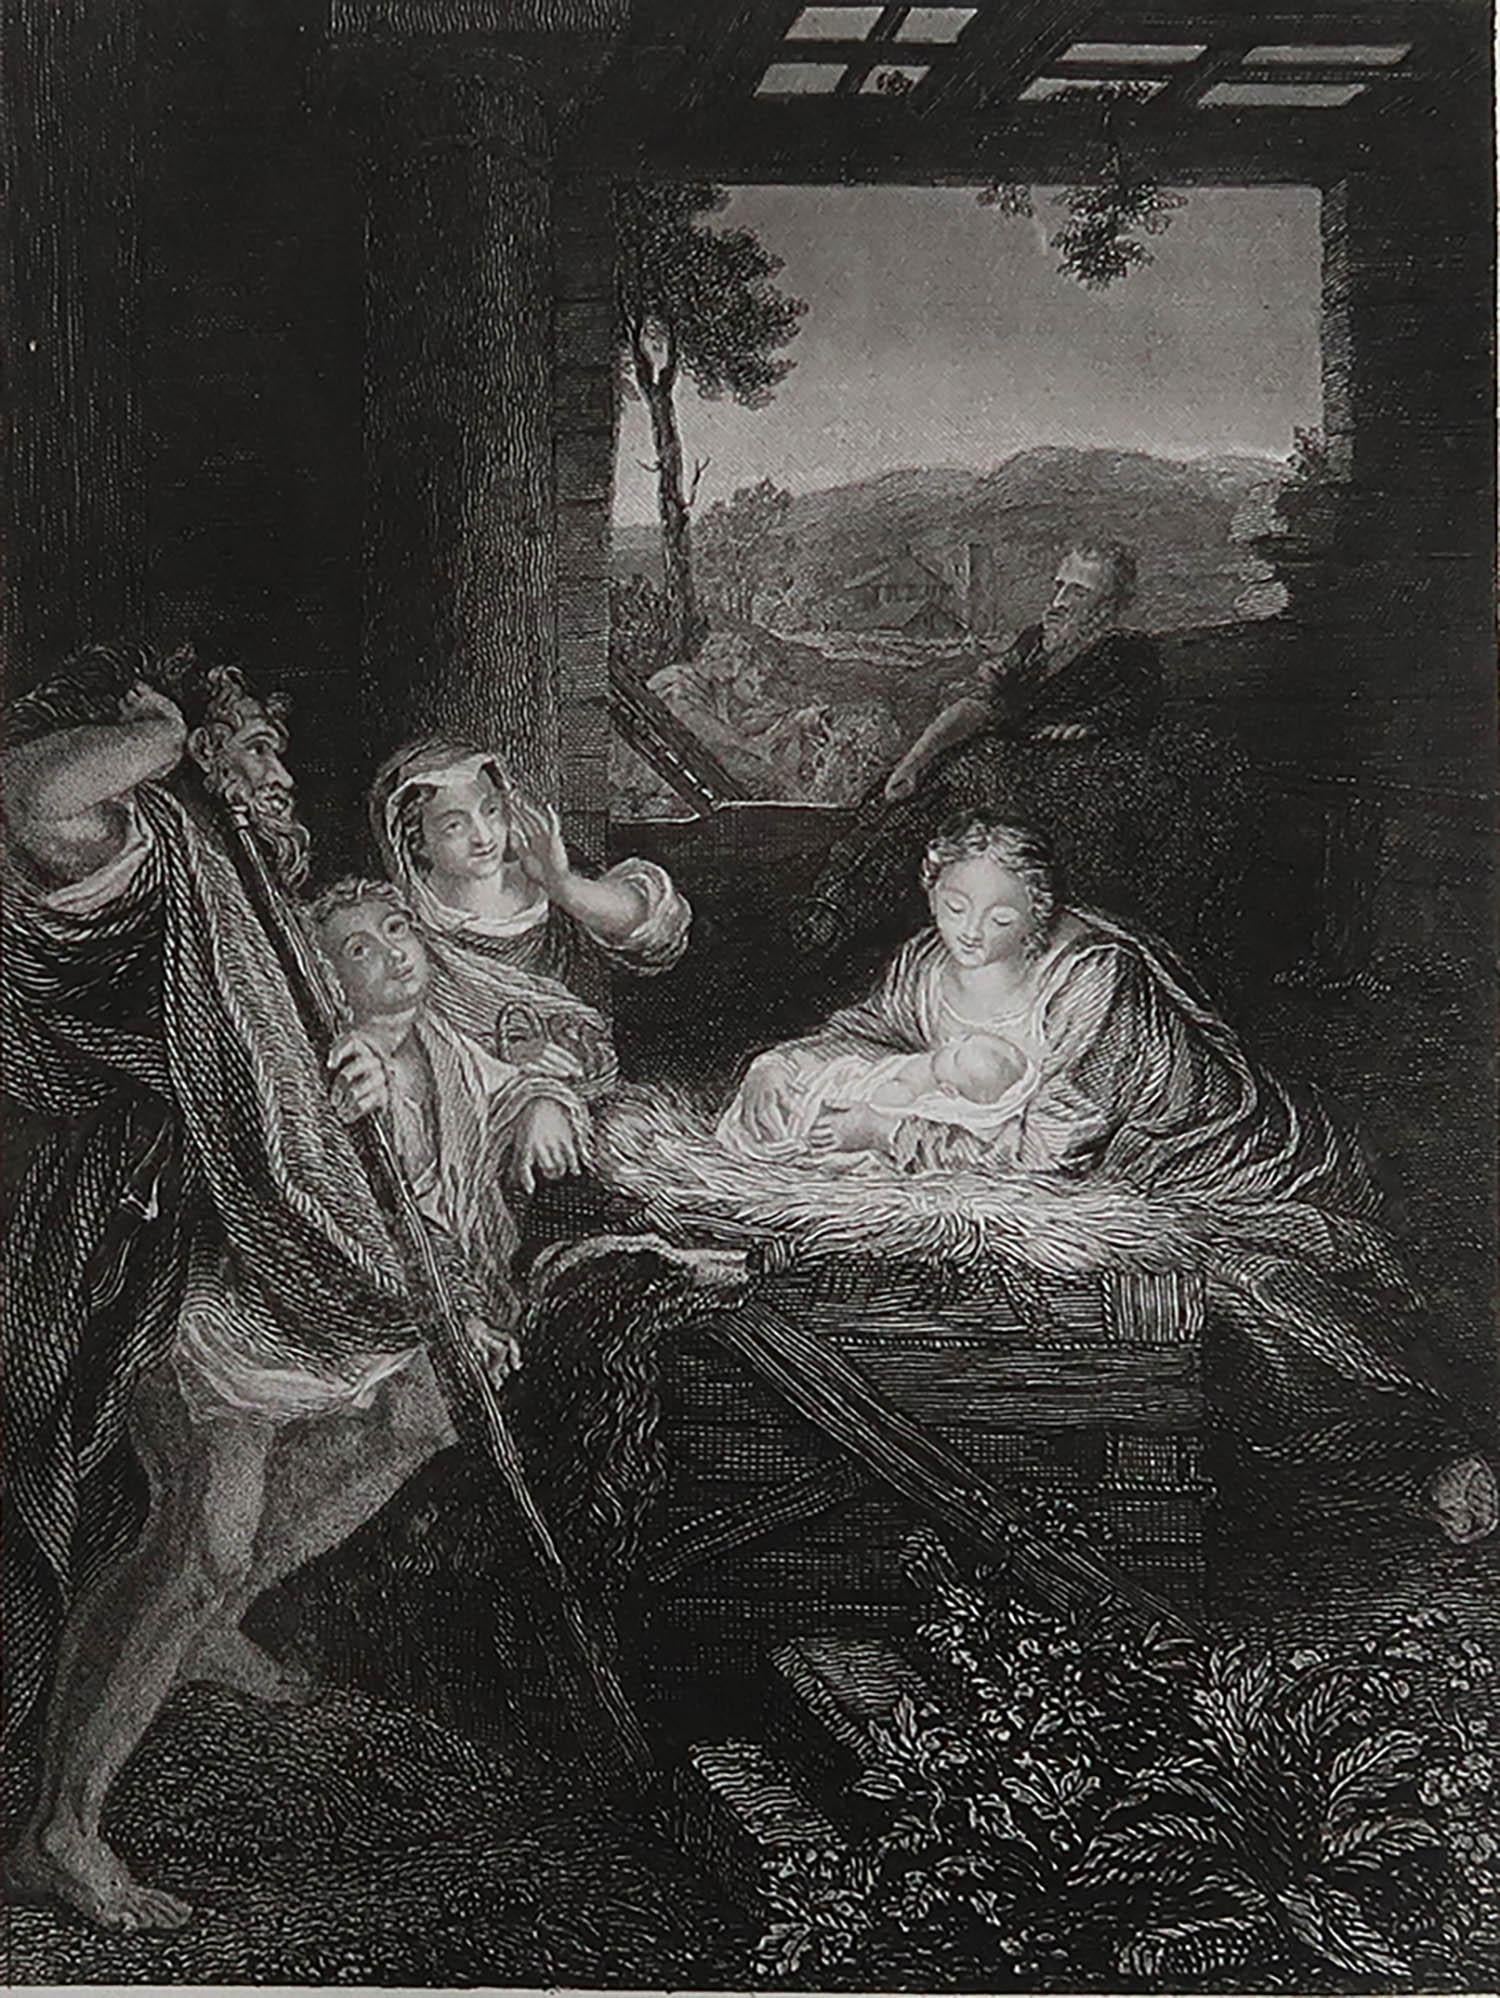 Wonderful image after Correggio

Fine Steel engraving. 

Published by Tallis, London. circa 1850

Unframed.

